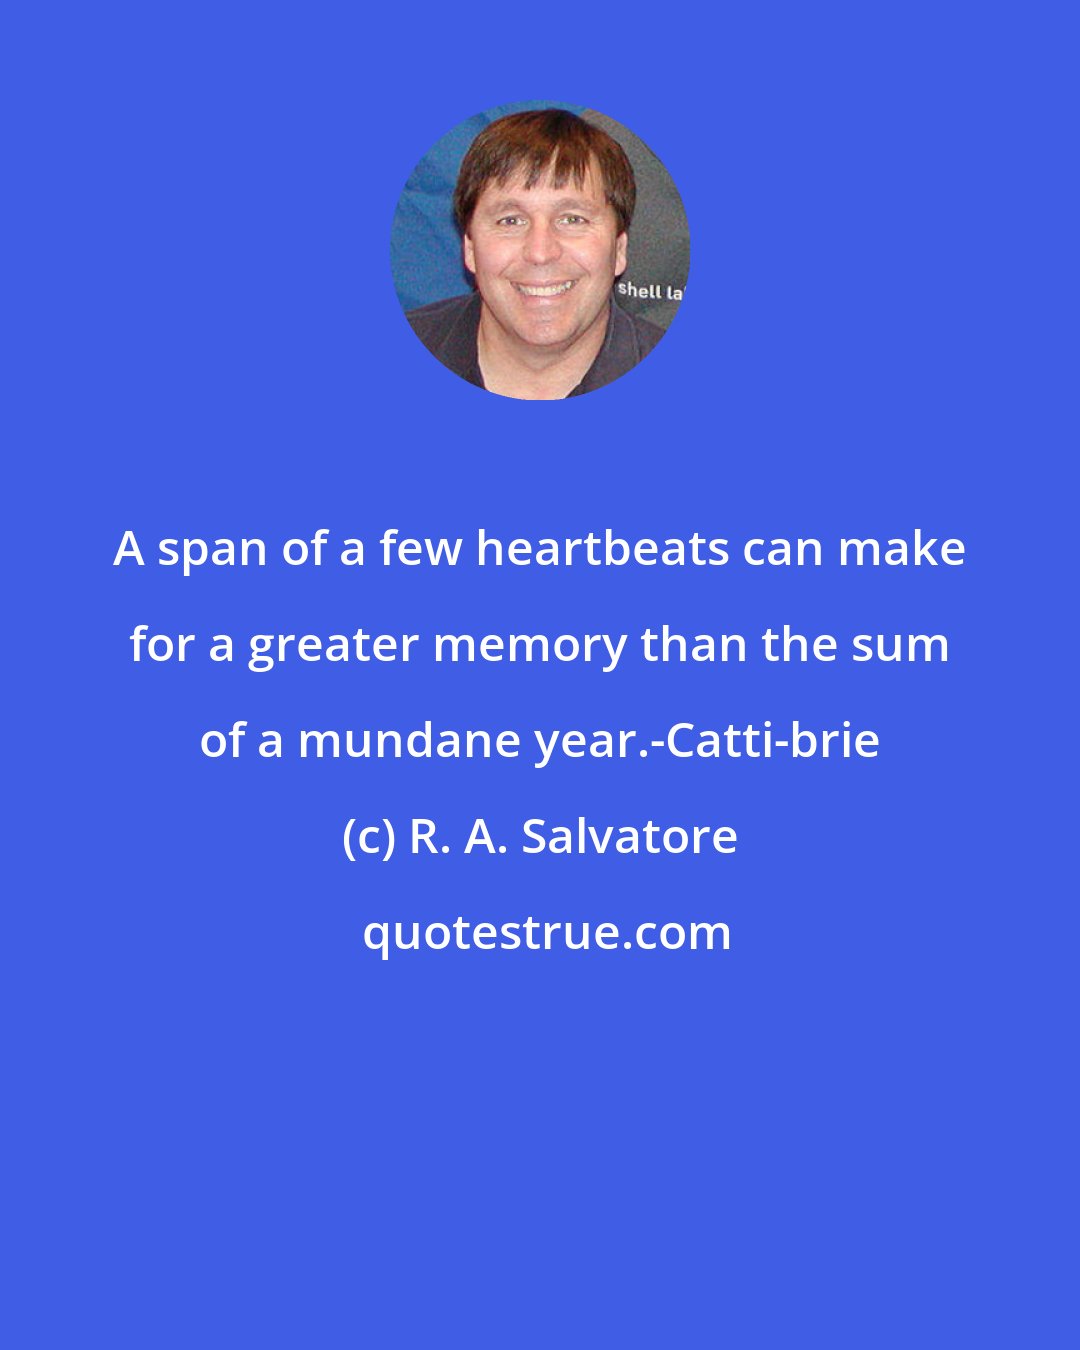 R. A. Salvatore: A span of a few heartbeats can make for a greater memory than the sum of a mundane year.-Catti-brie